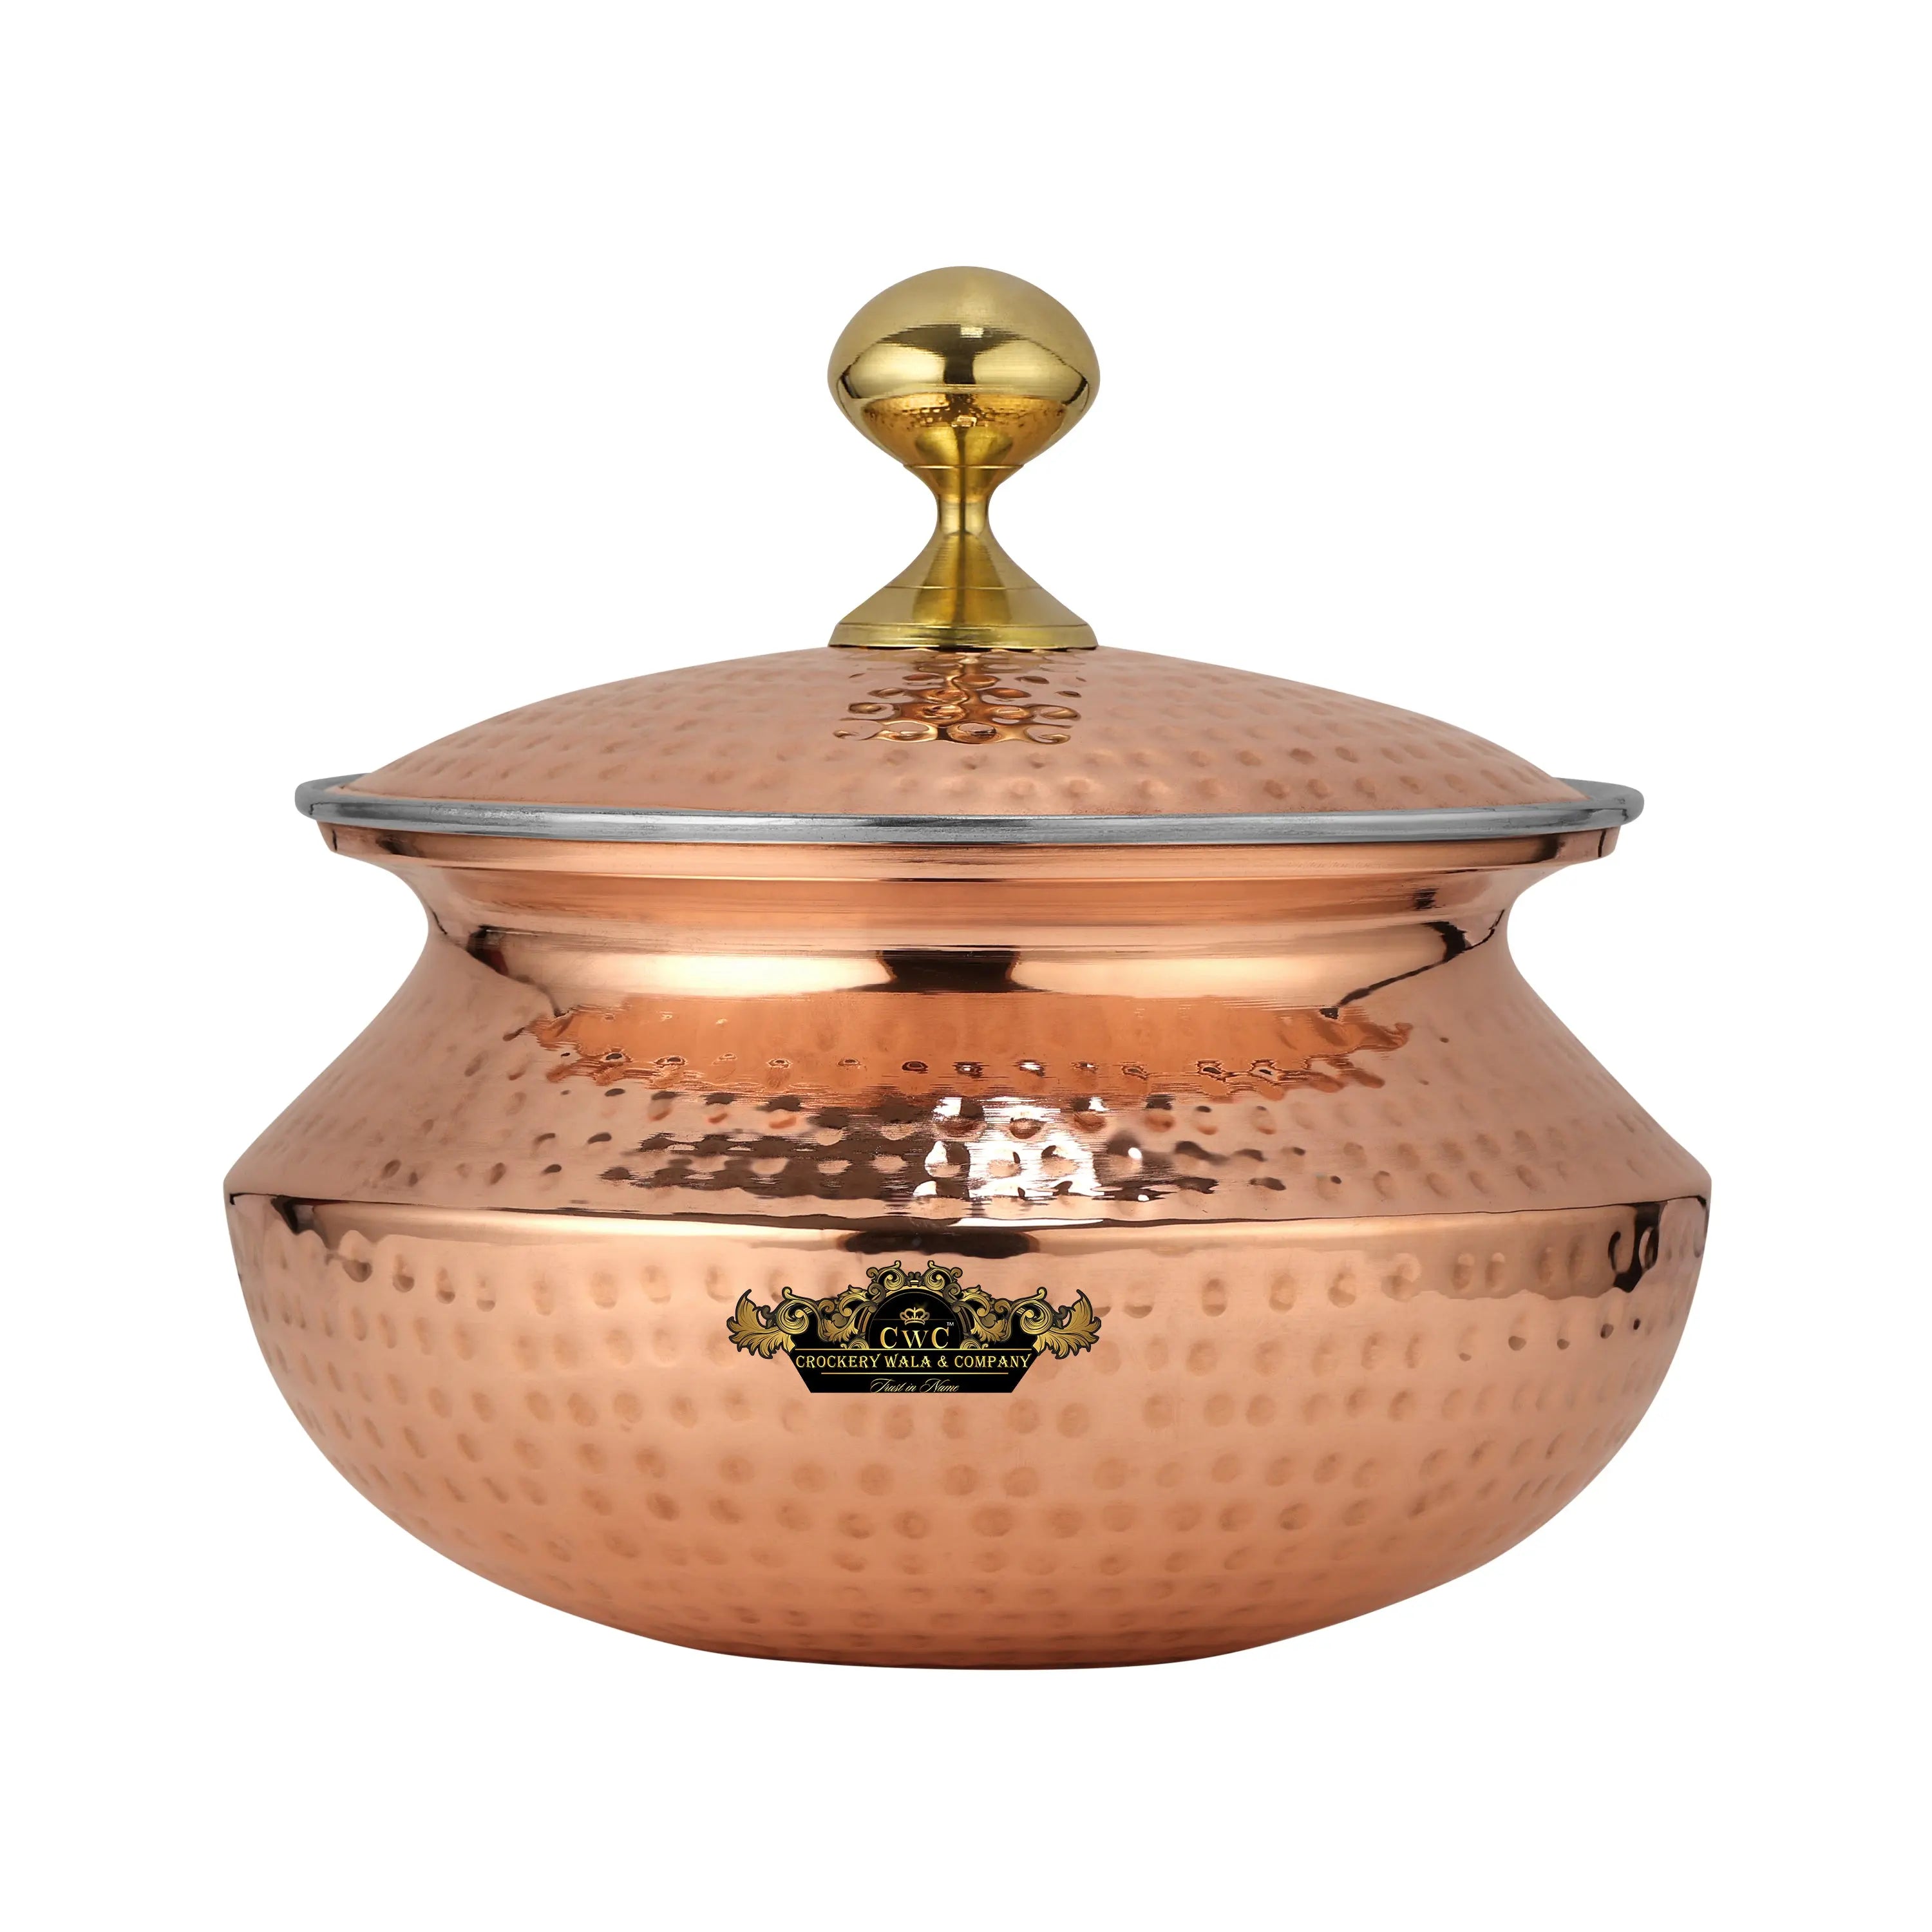 Pure copper patili handi for cooking meat and nahari with kalai inside and hammered finish with lid and premium quality CROCKERY WALA AND COMPANY